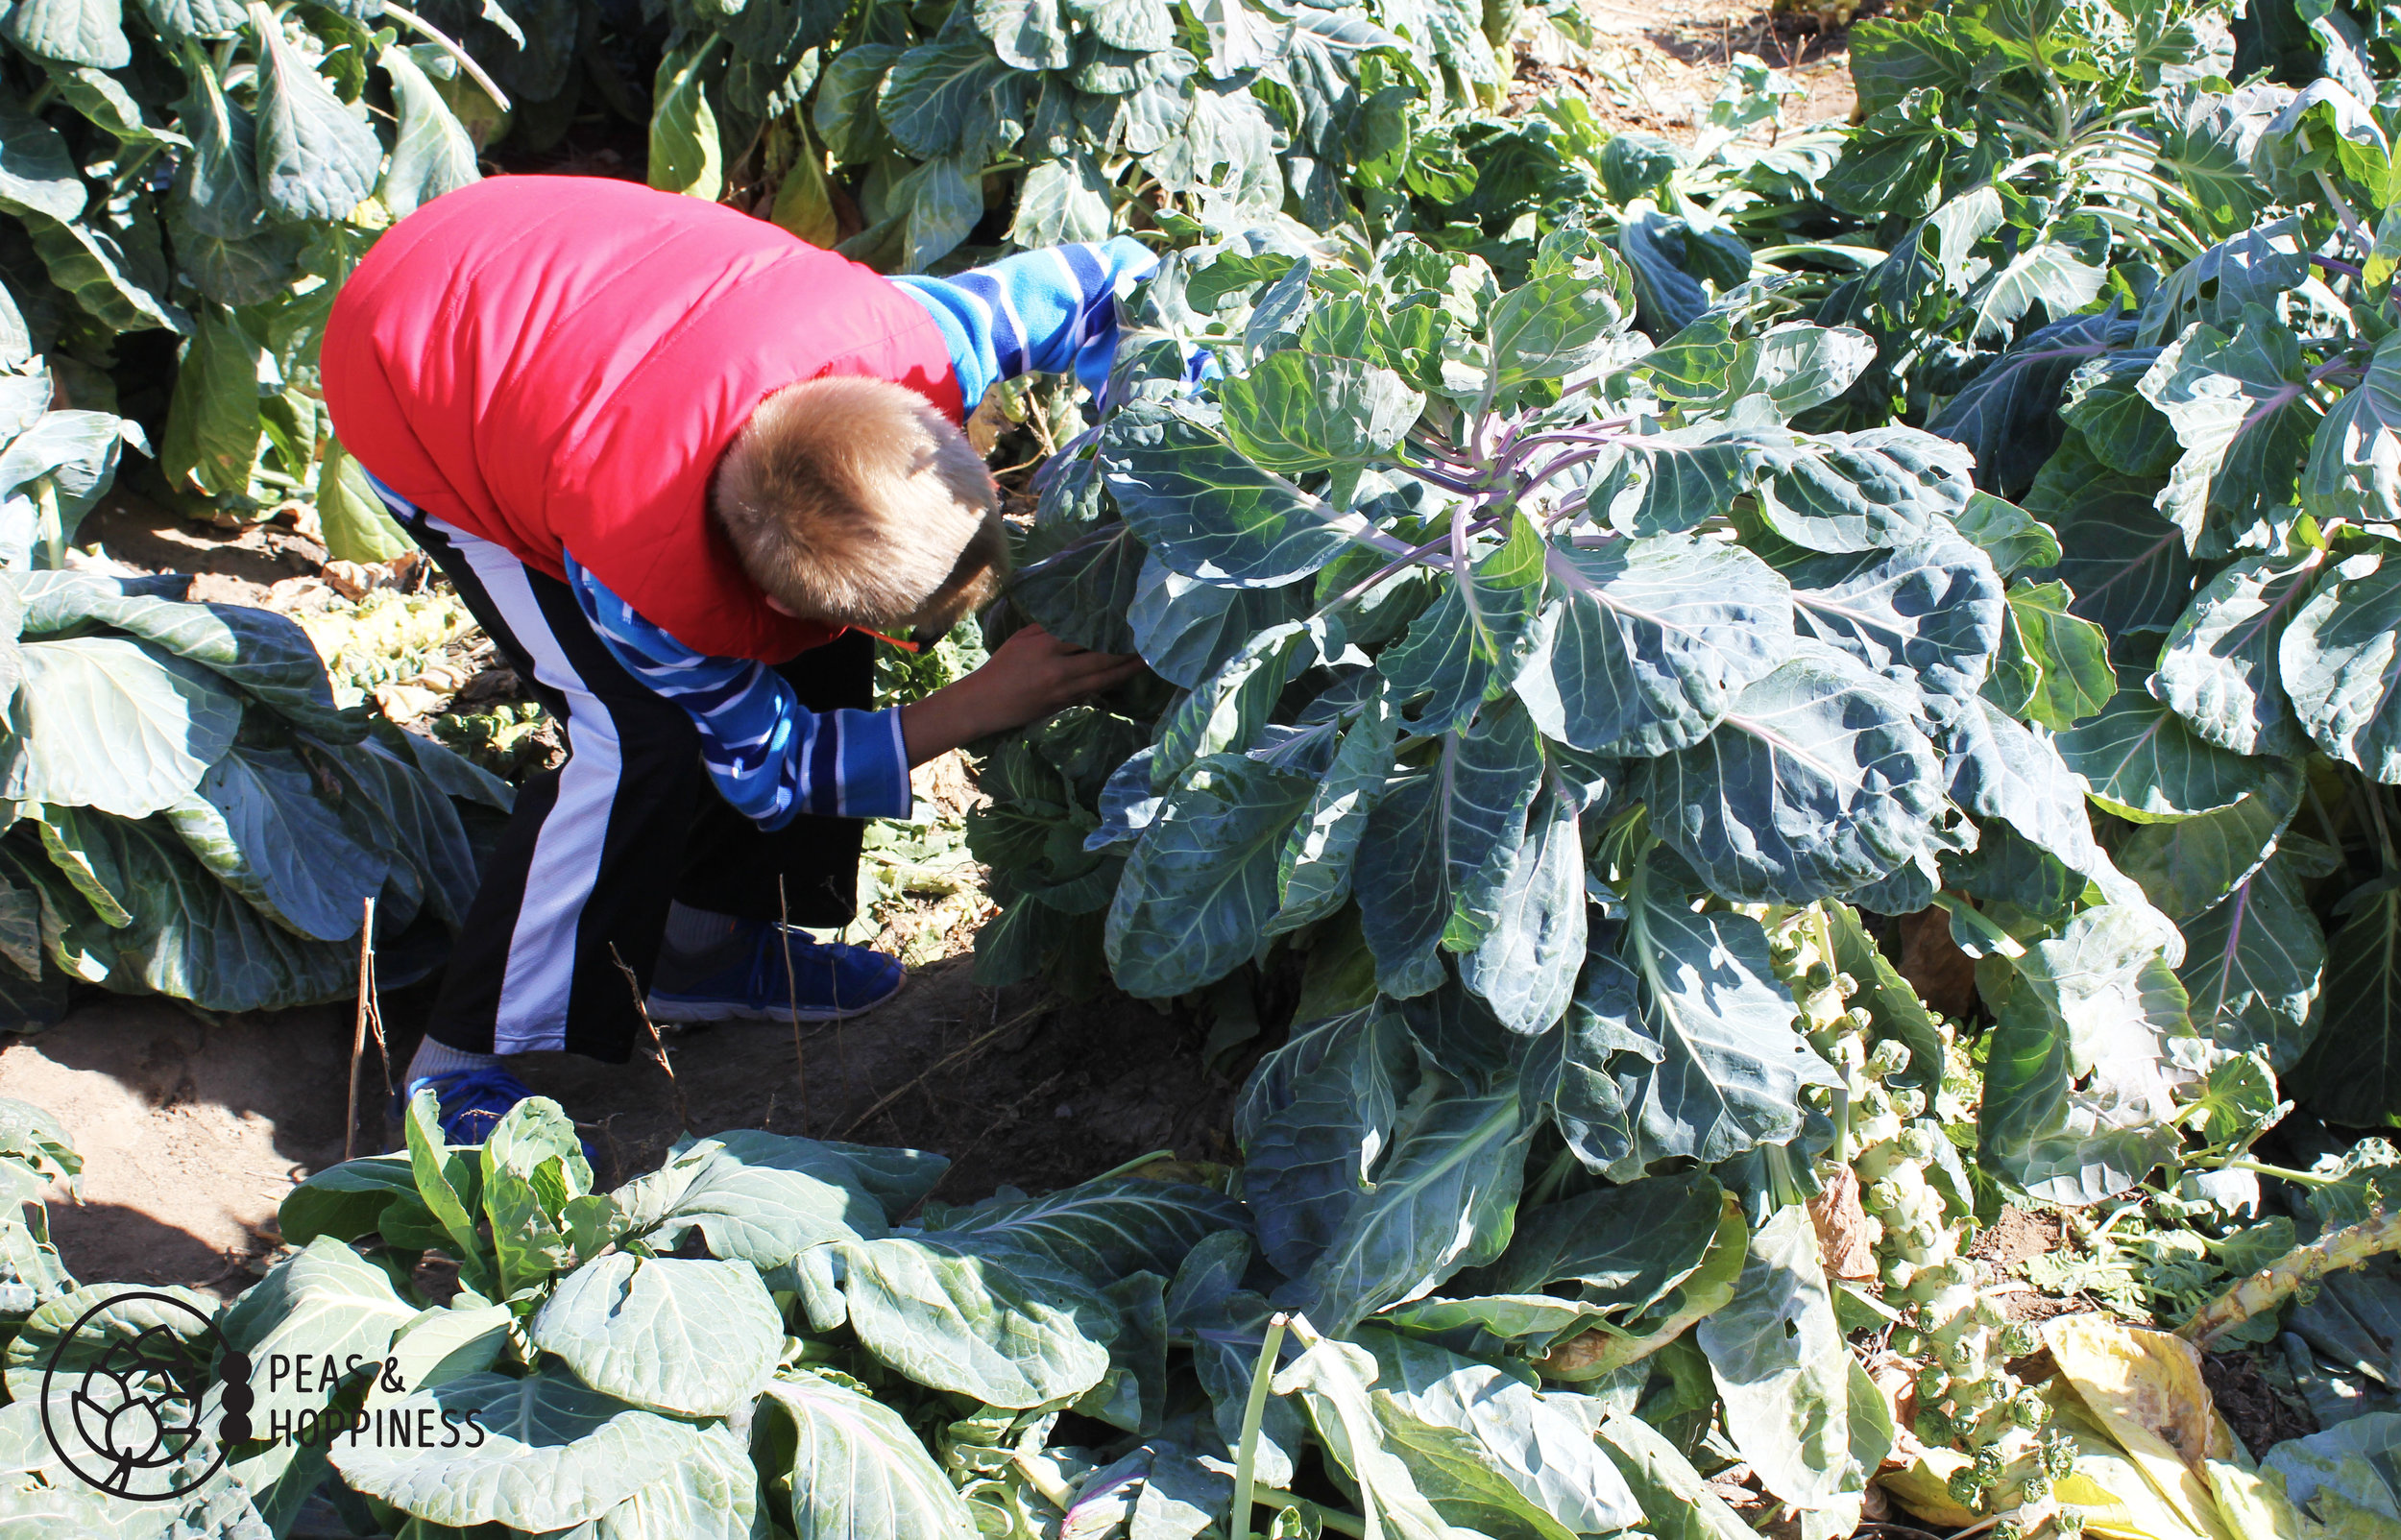 Searching for the elusive Brussels sprout at Miller Farms' Fall Festival